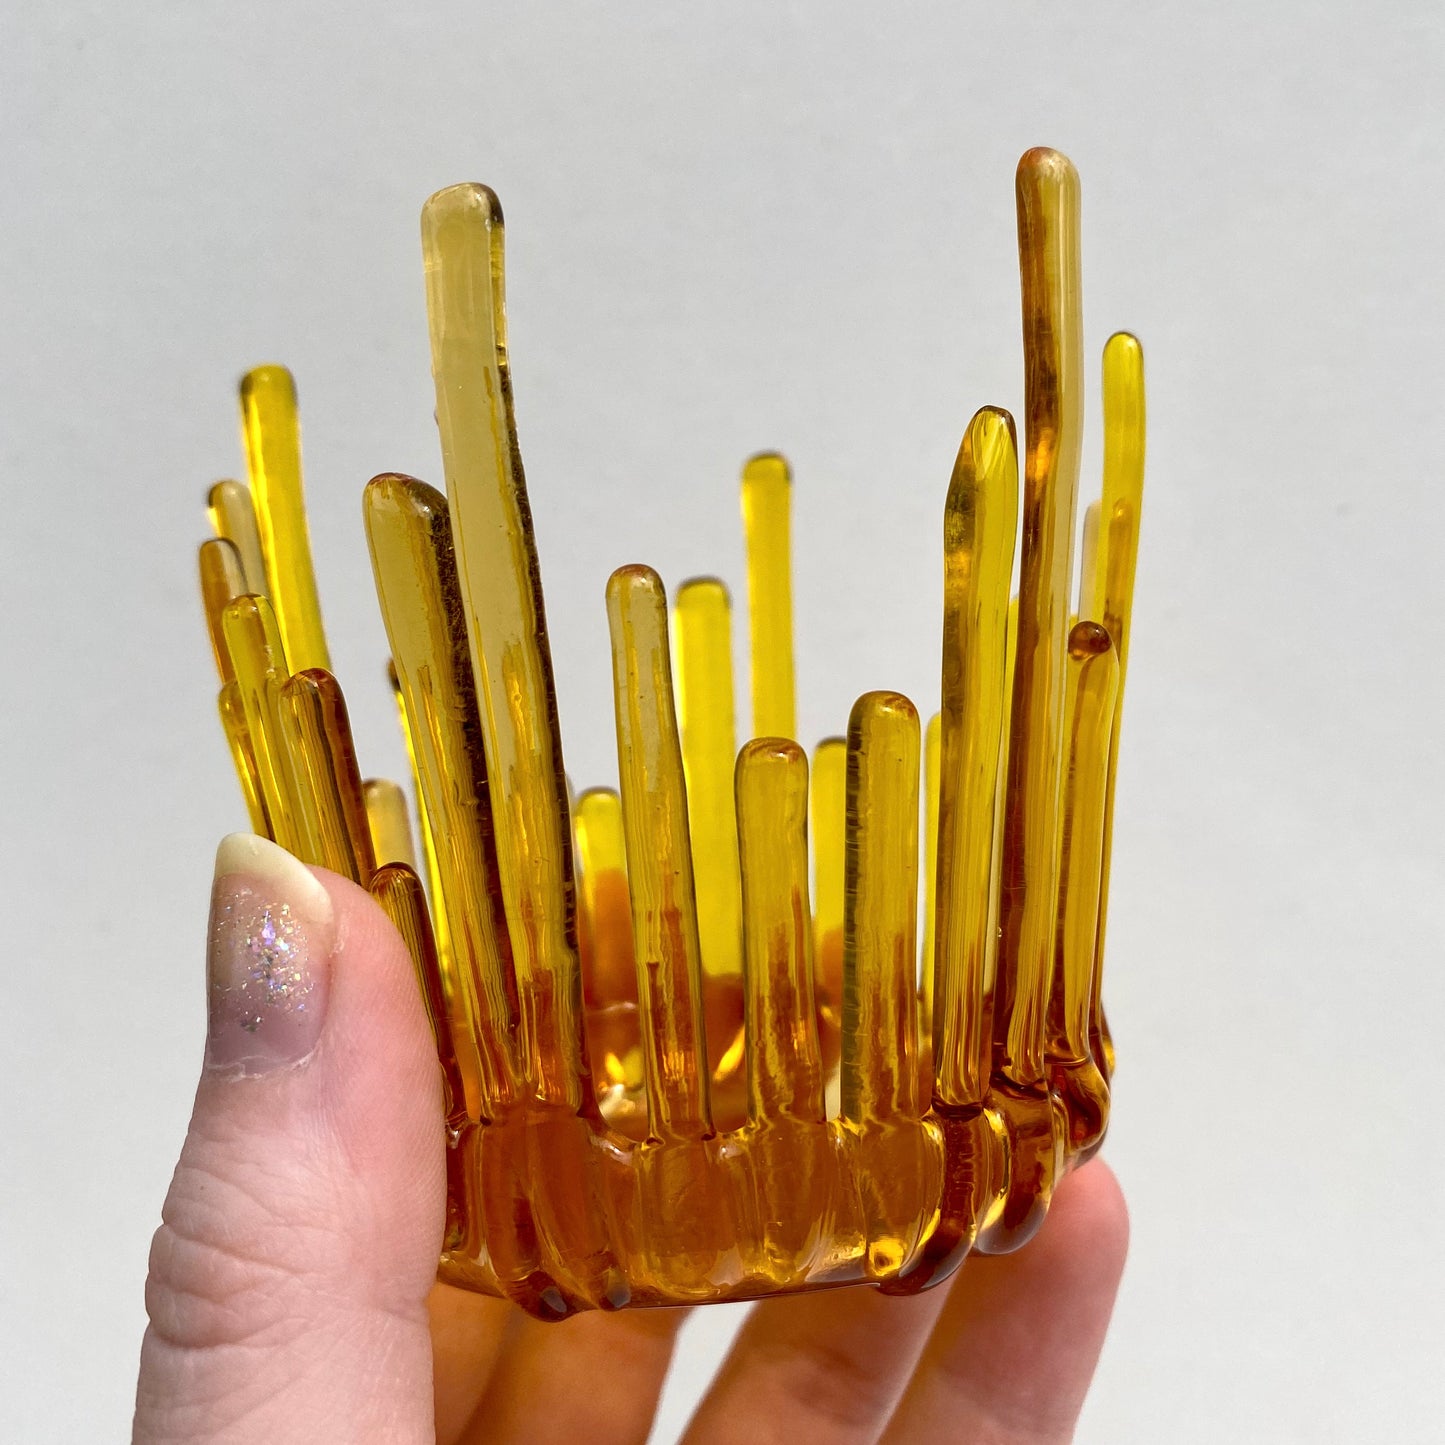 Candle Holder - Yellow Sun Crown